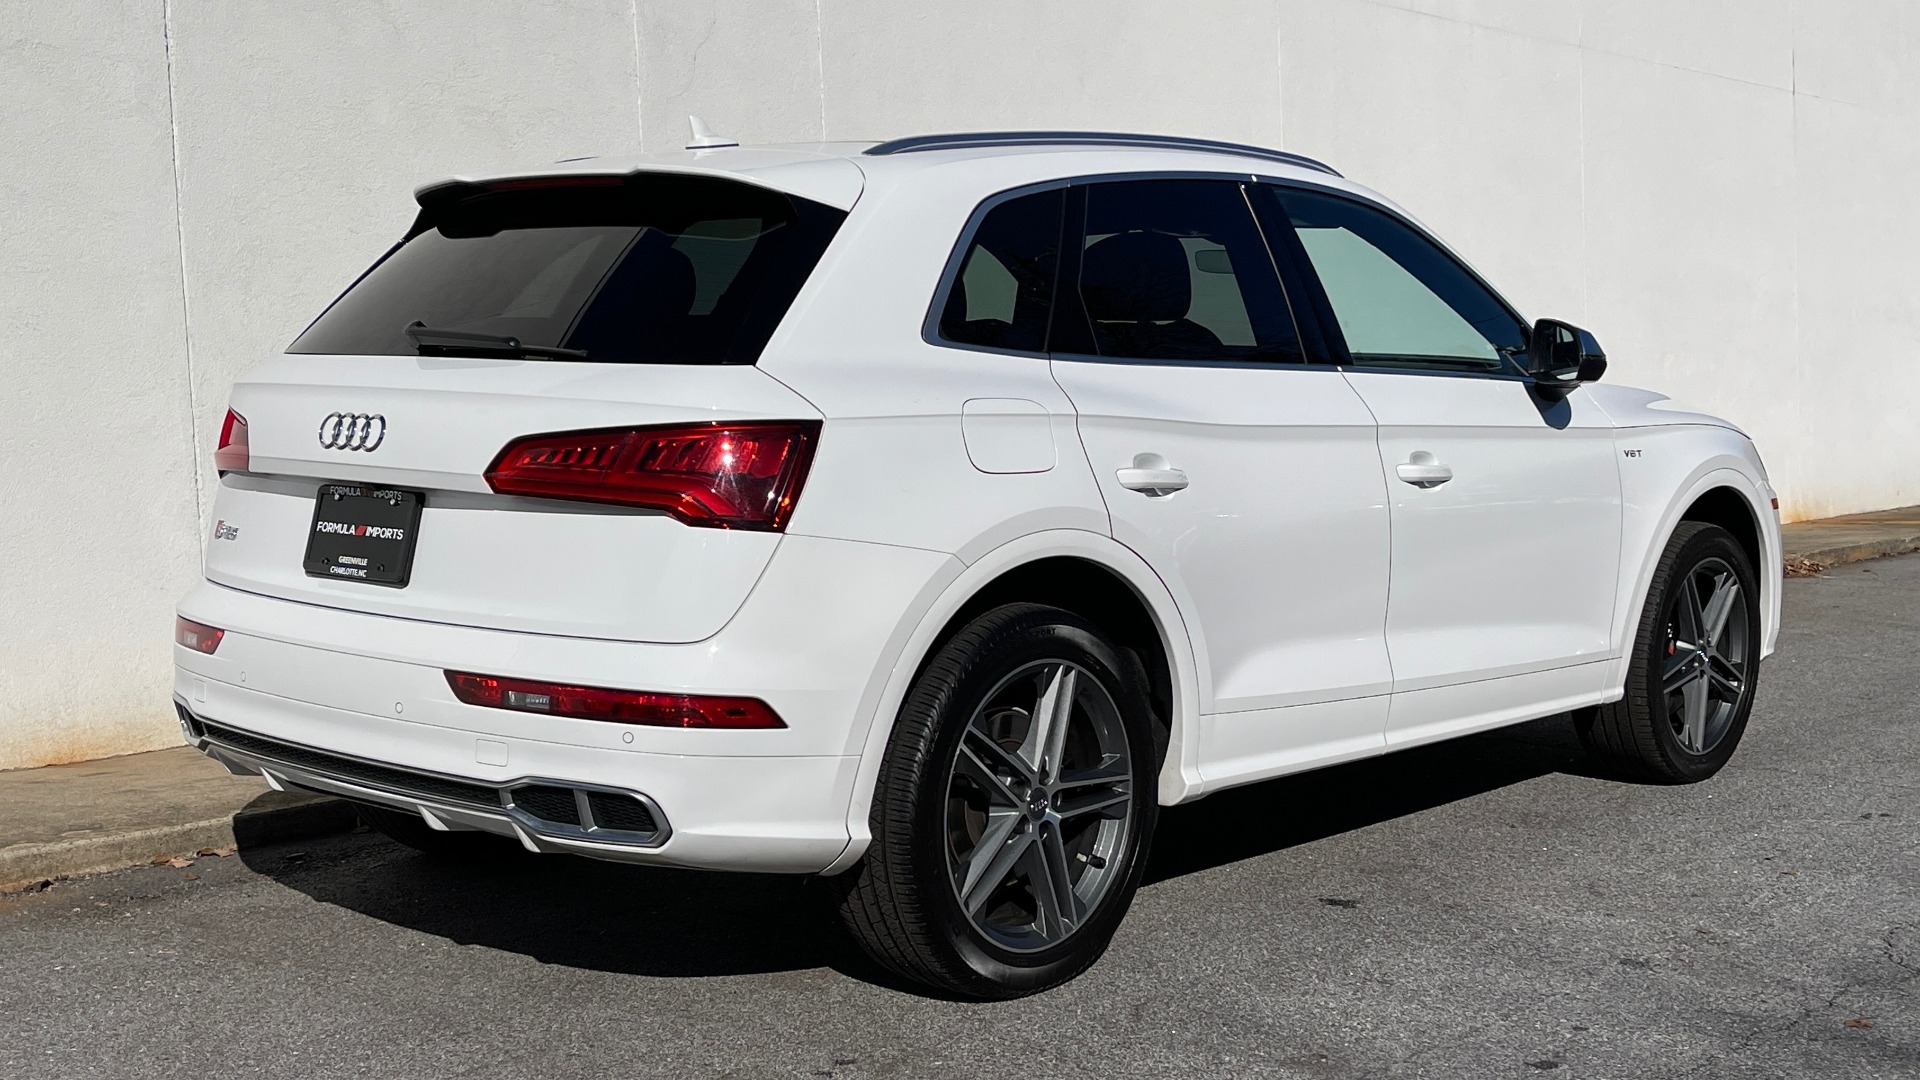 Used 2018 Audi SQ5 PREMIUM PLUS / NAV / SUNROOF / 12.3IN SCREEN / REARVIEW for sale $46,795 at Formula Imports in Charlotte NC 28227 6